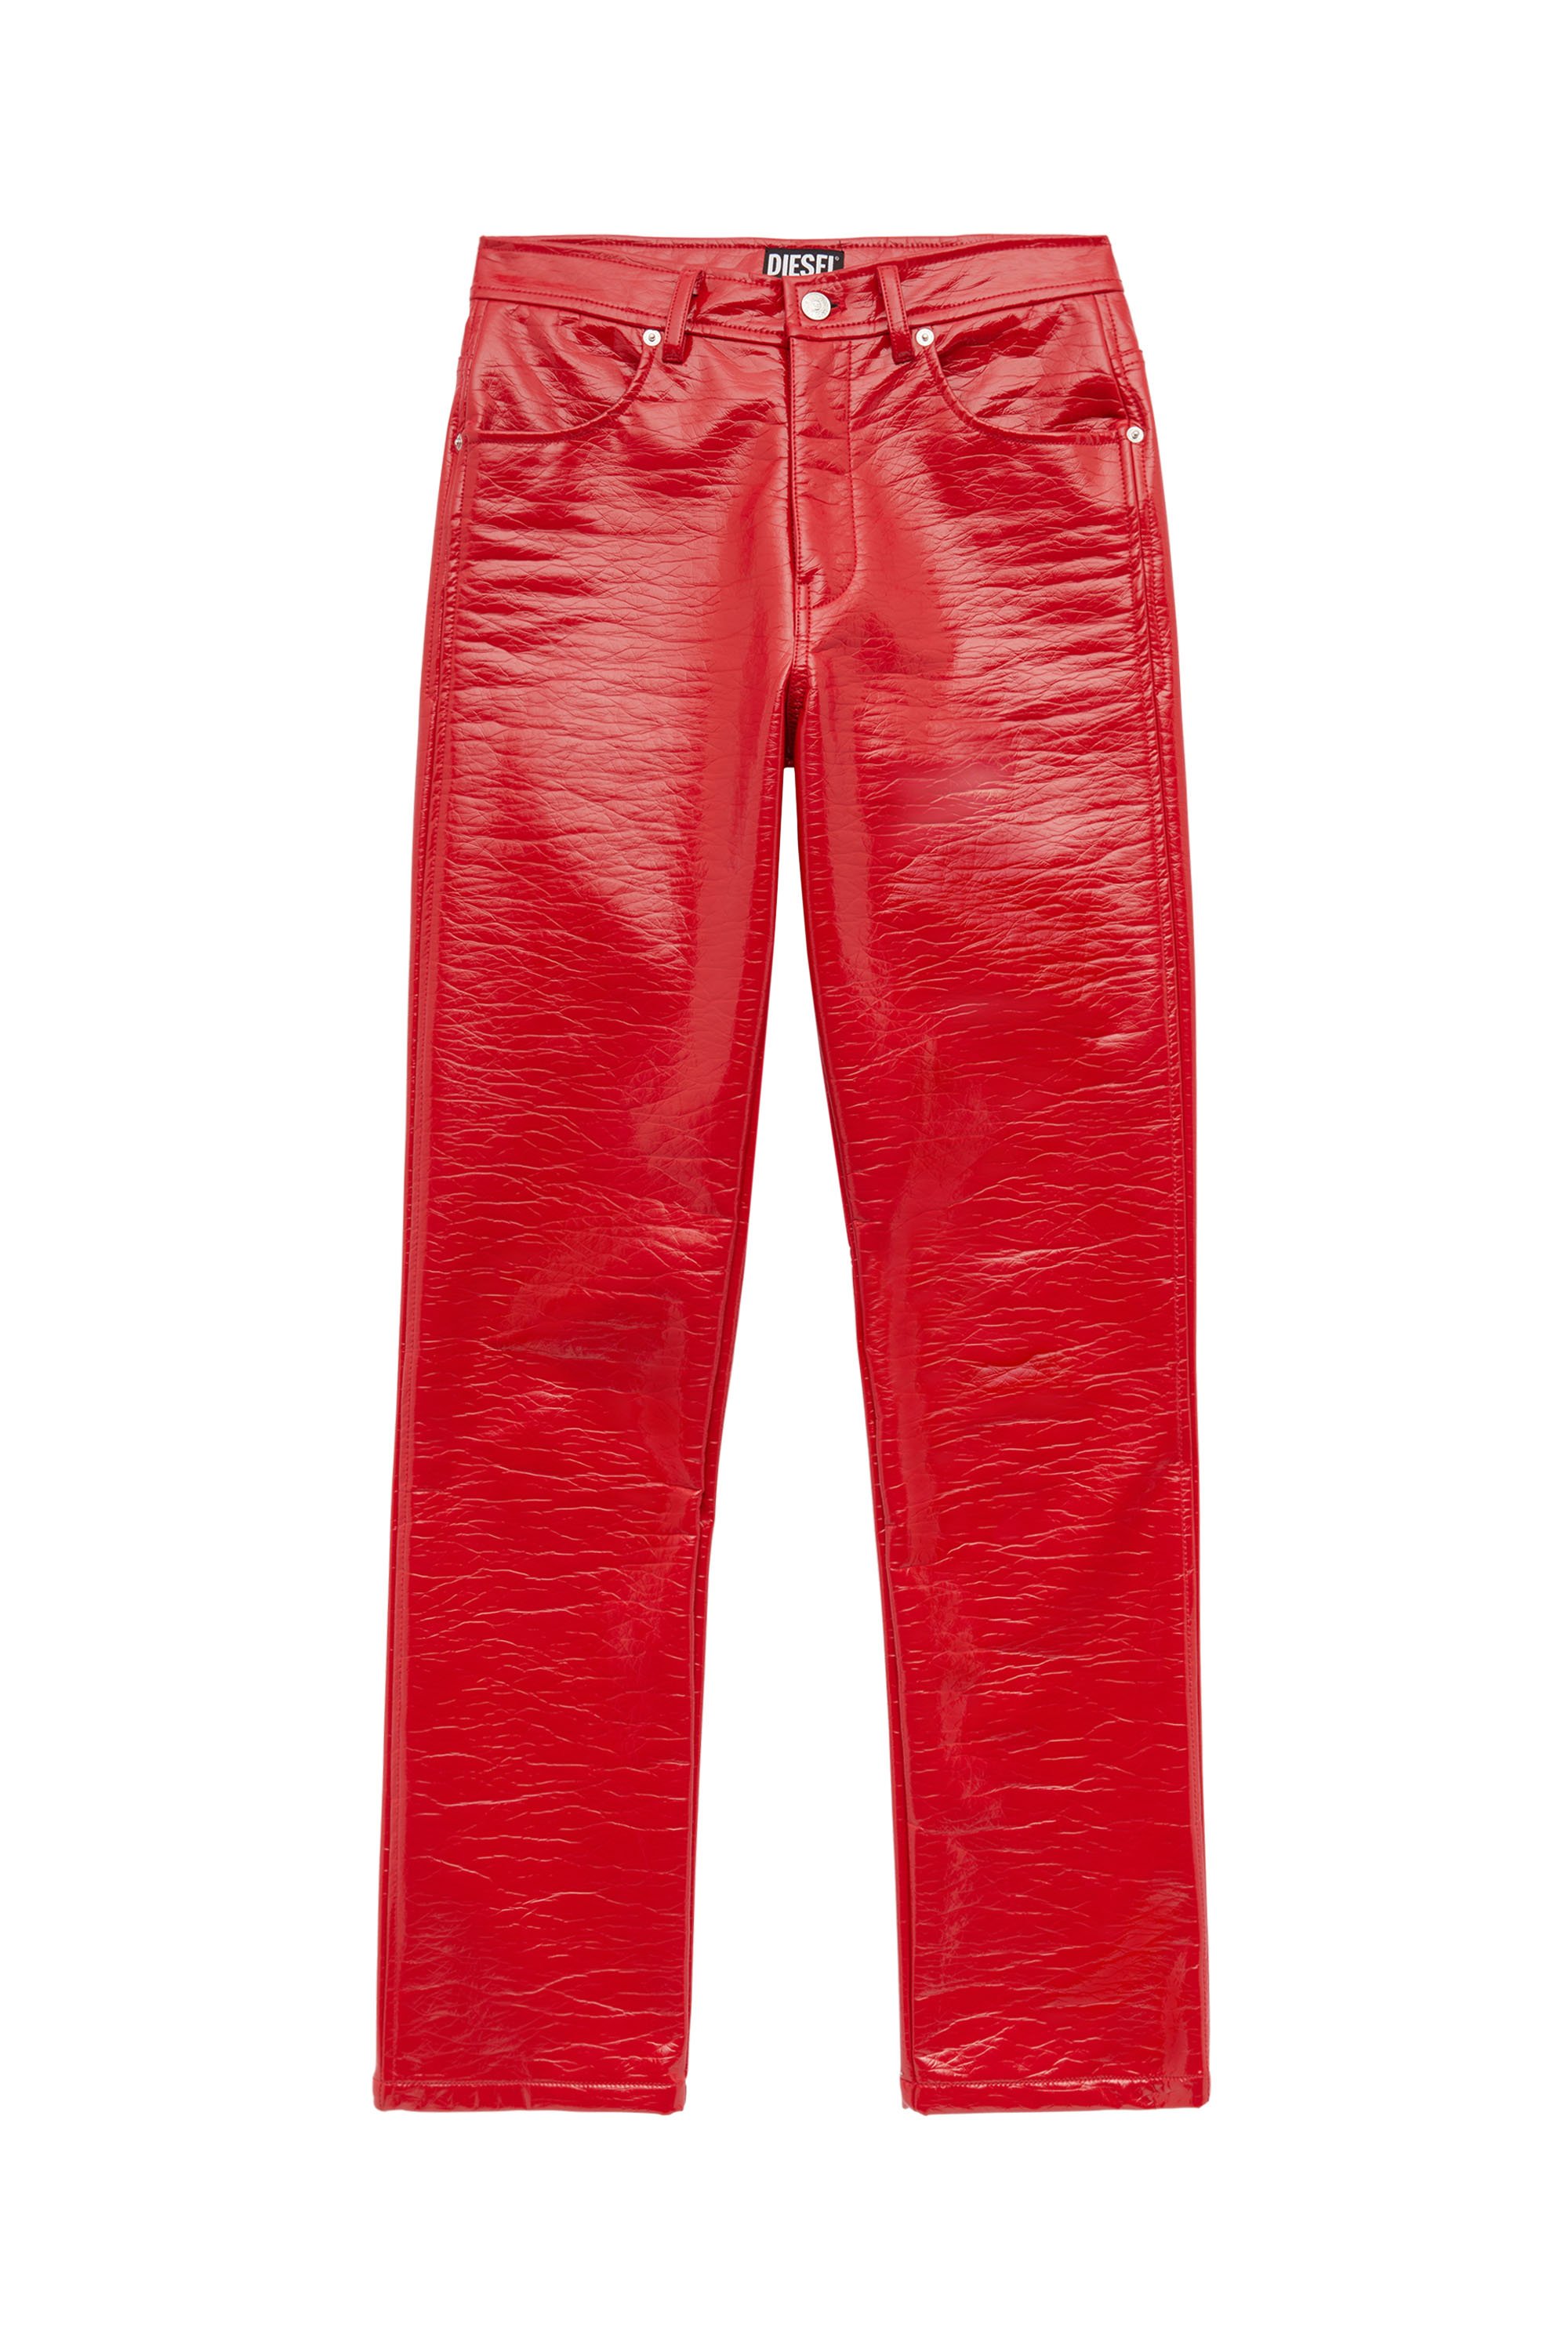 P-ARCY, Red - Pants